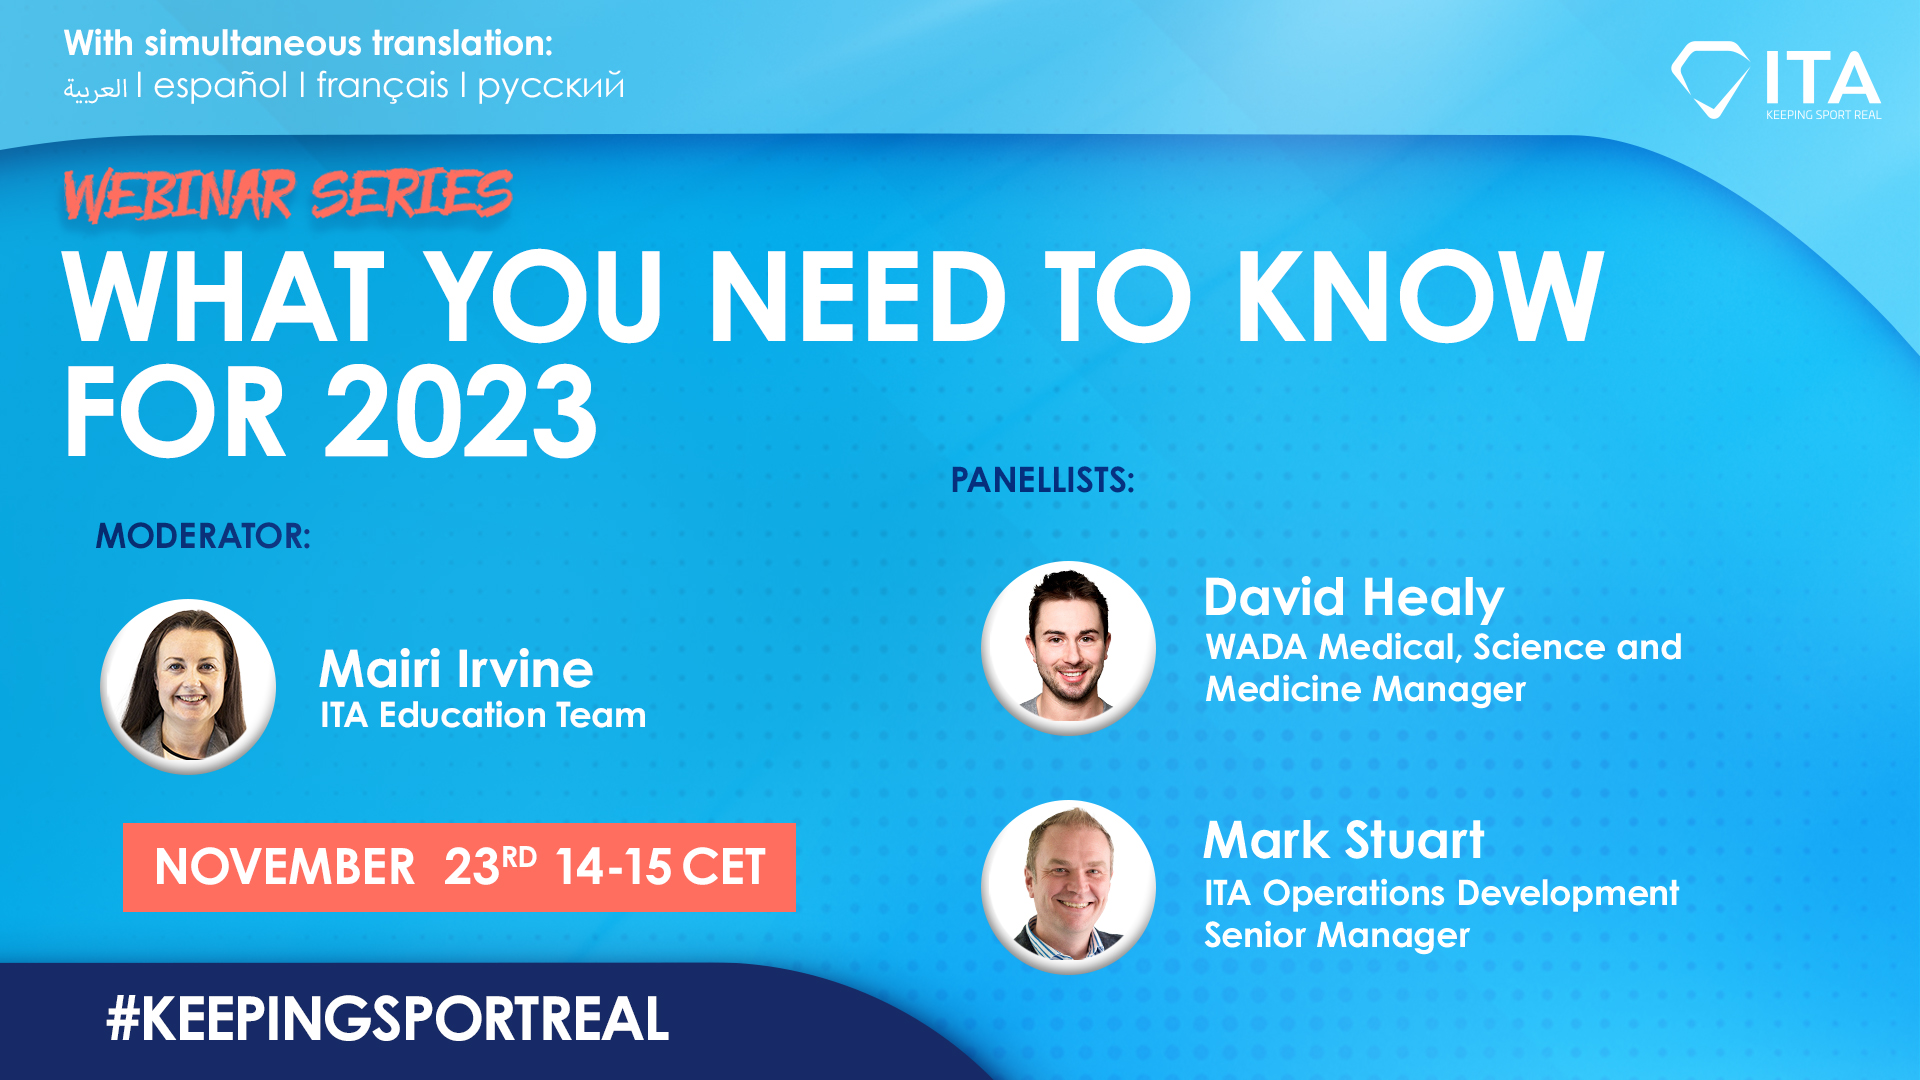 ITA Webinar - What you need to know for 2023